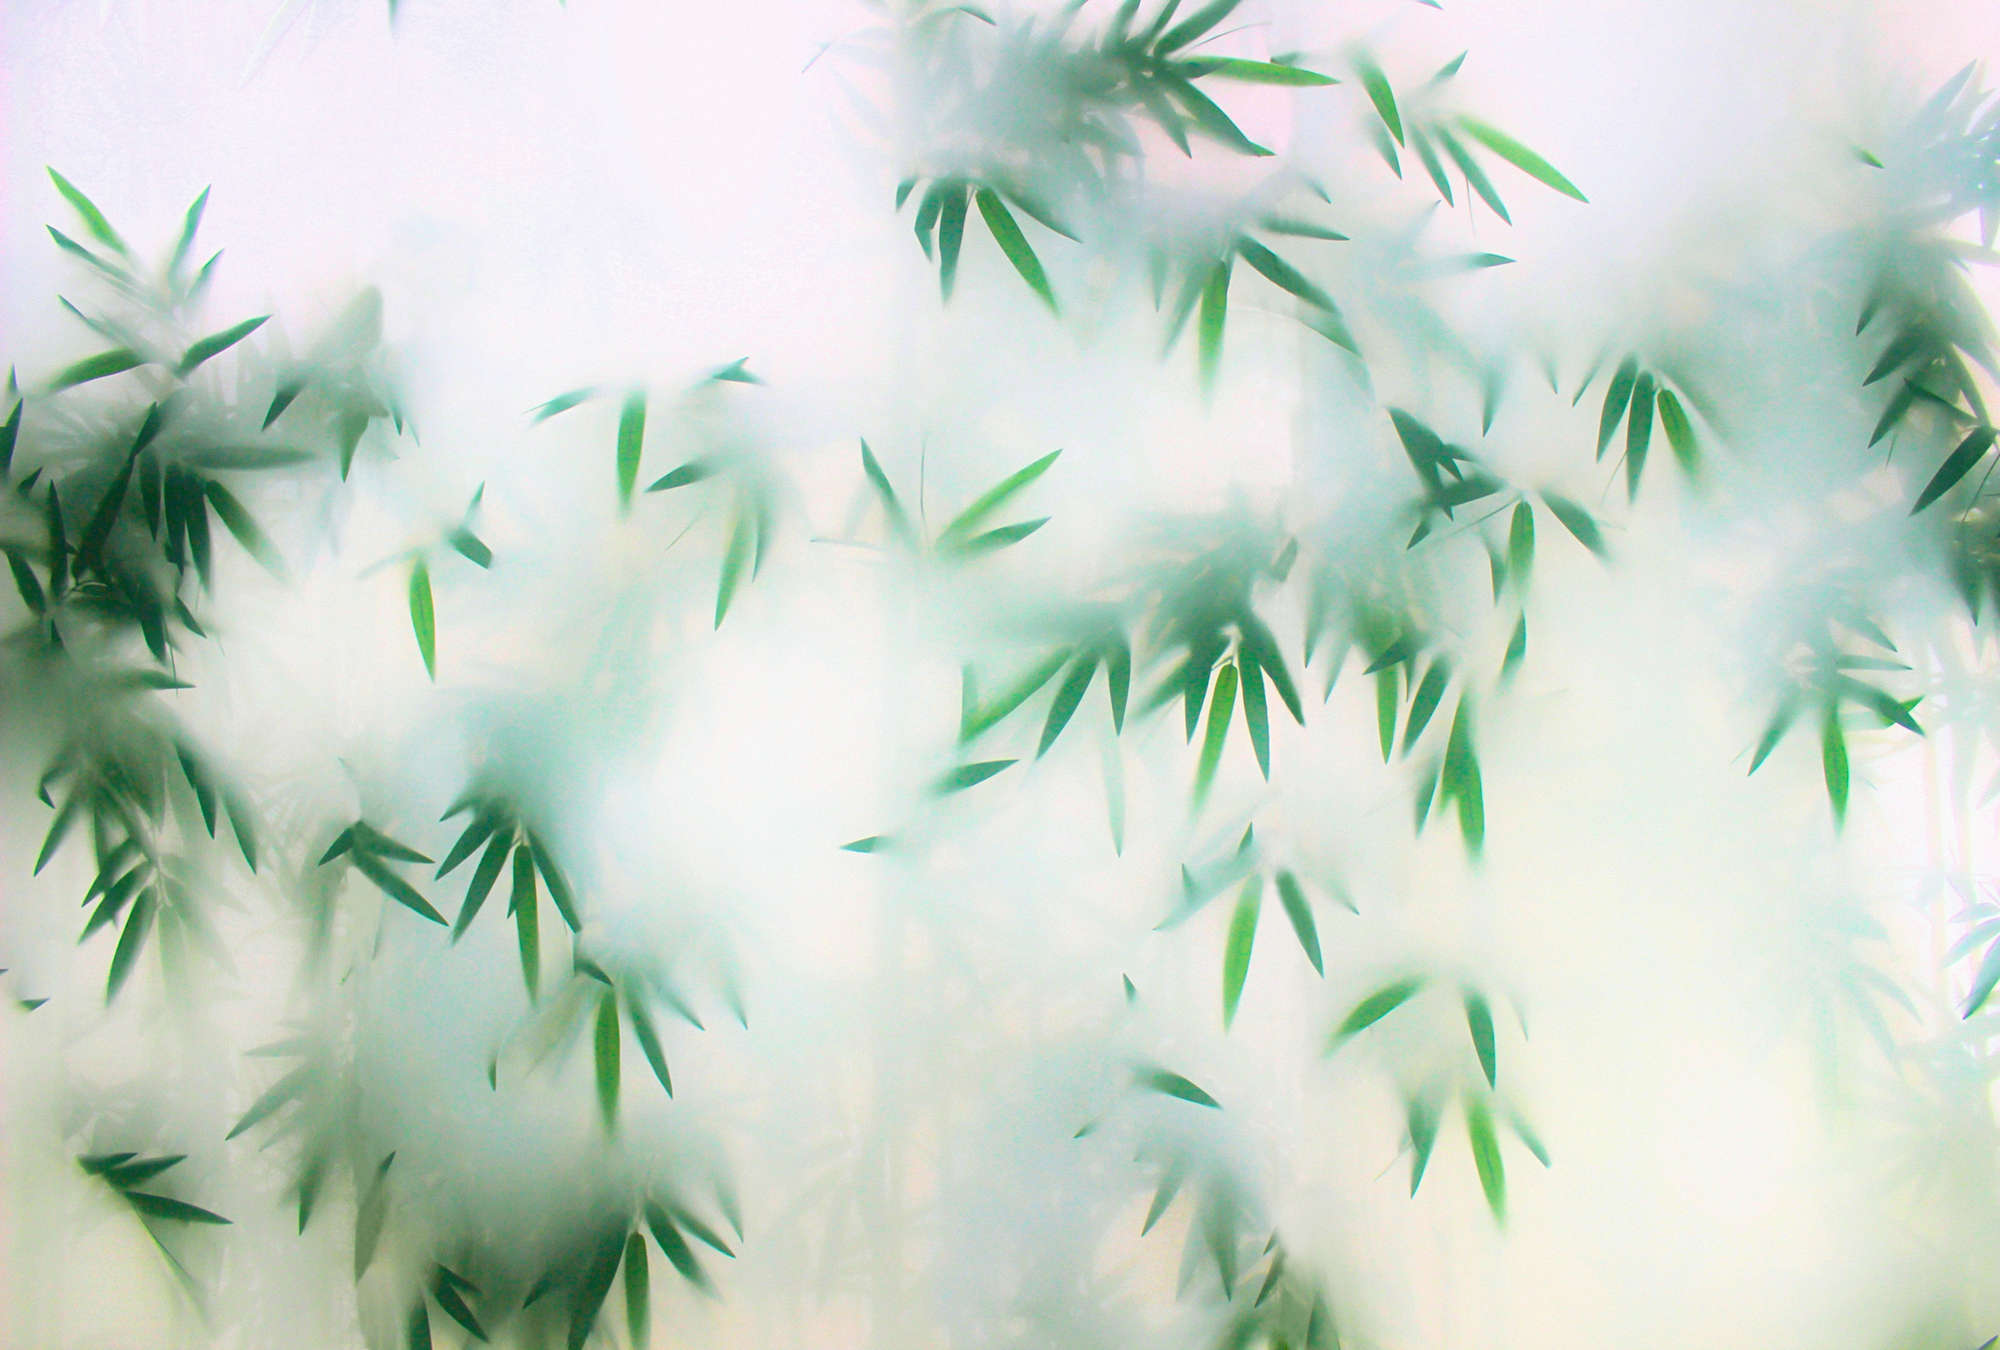             Panda Paradise 3 - leaves photo wallpaper bamboo in the mist
        